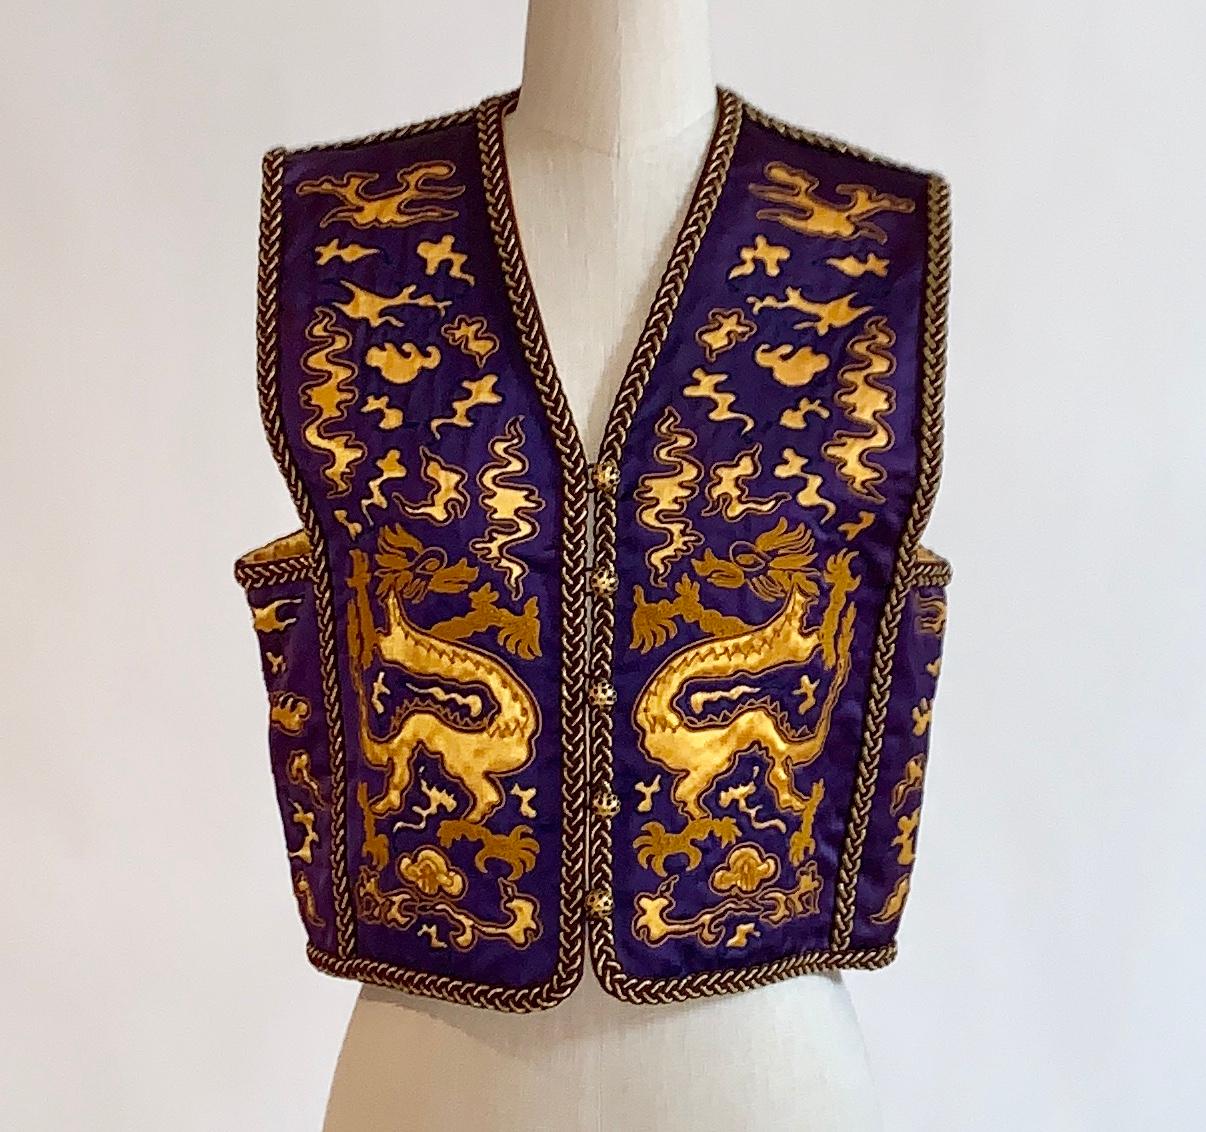 Yves Saint Laurent Rive Gauche 1960s or 1970s vintage satiny purple cropped waistcoat vest which has been embroidered and cut away to reveal a gold dragon print. Gold braided trim and beautiful black and gold buttons with loop closures. Documented,